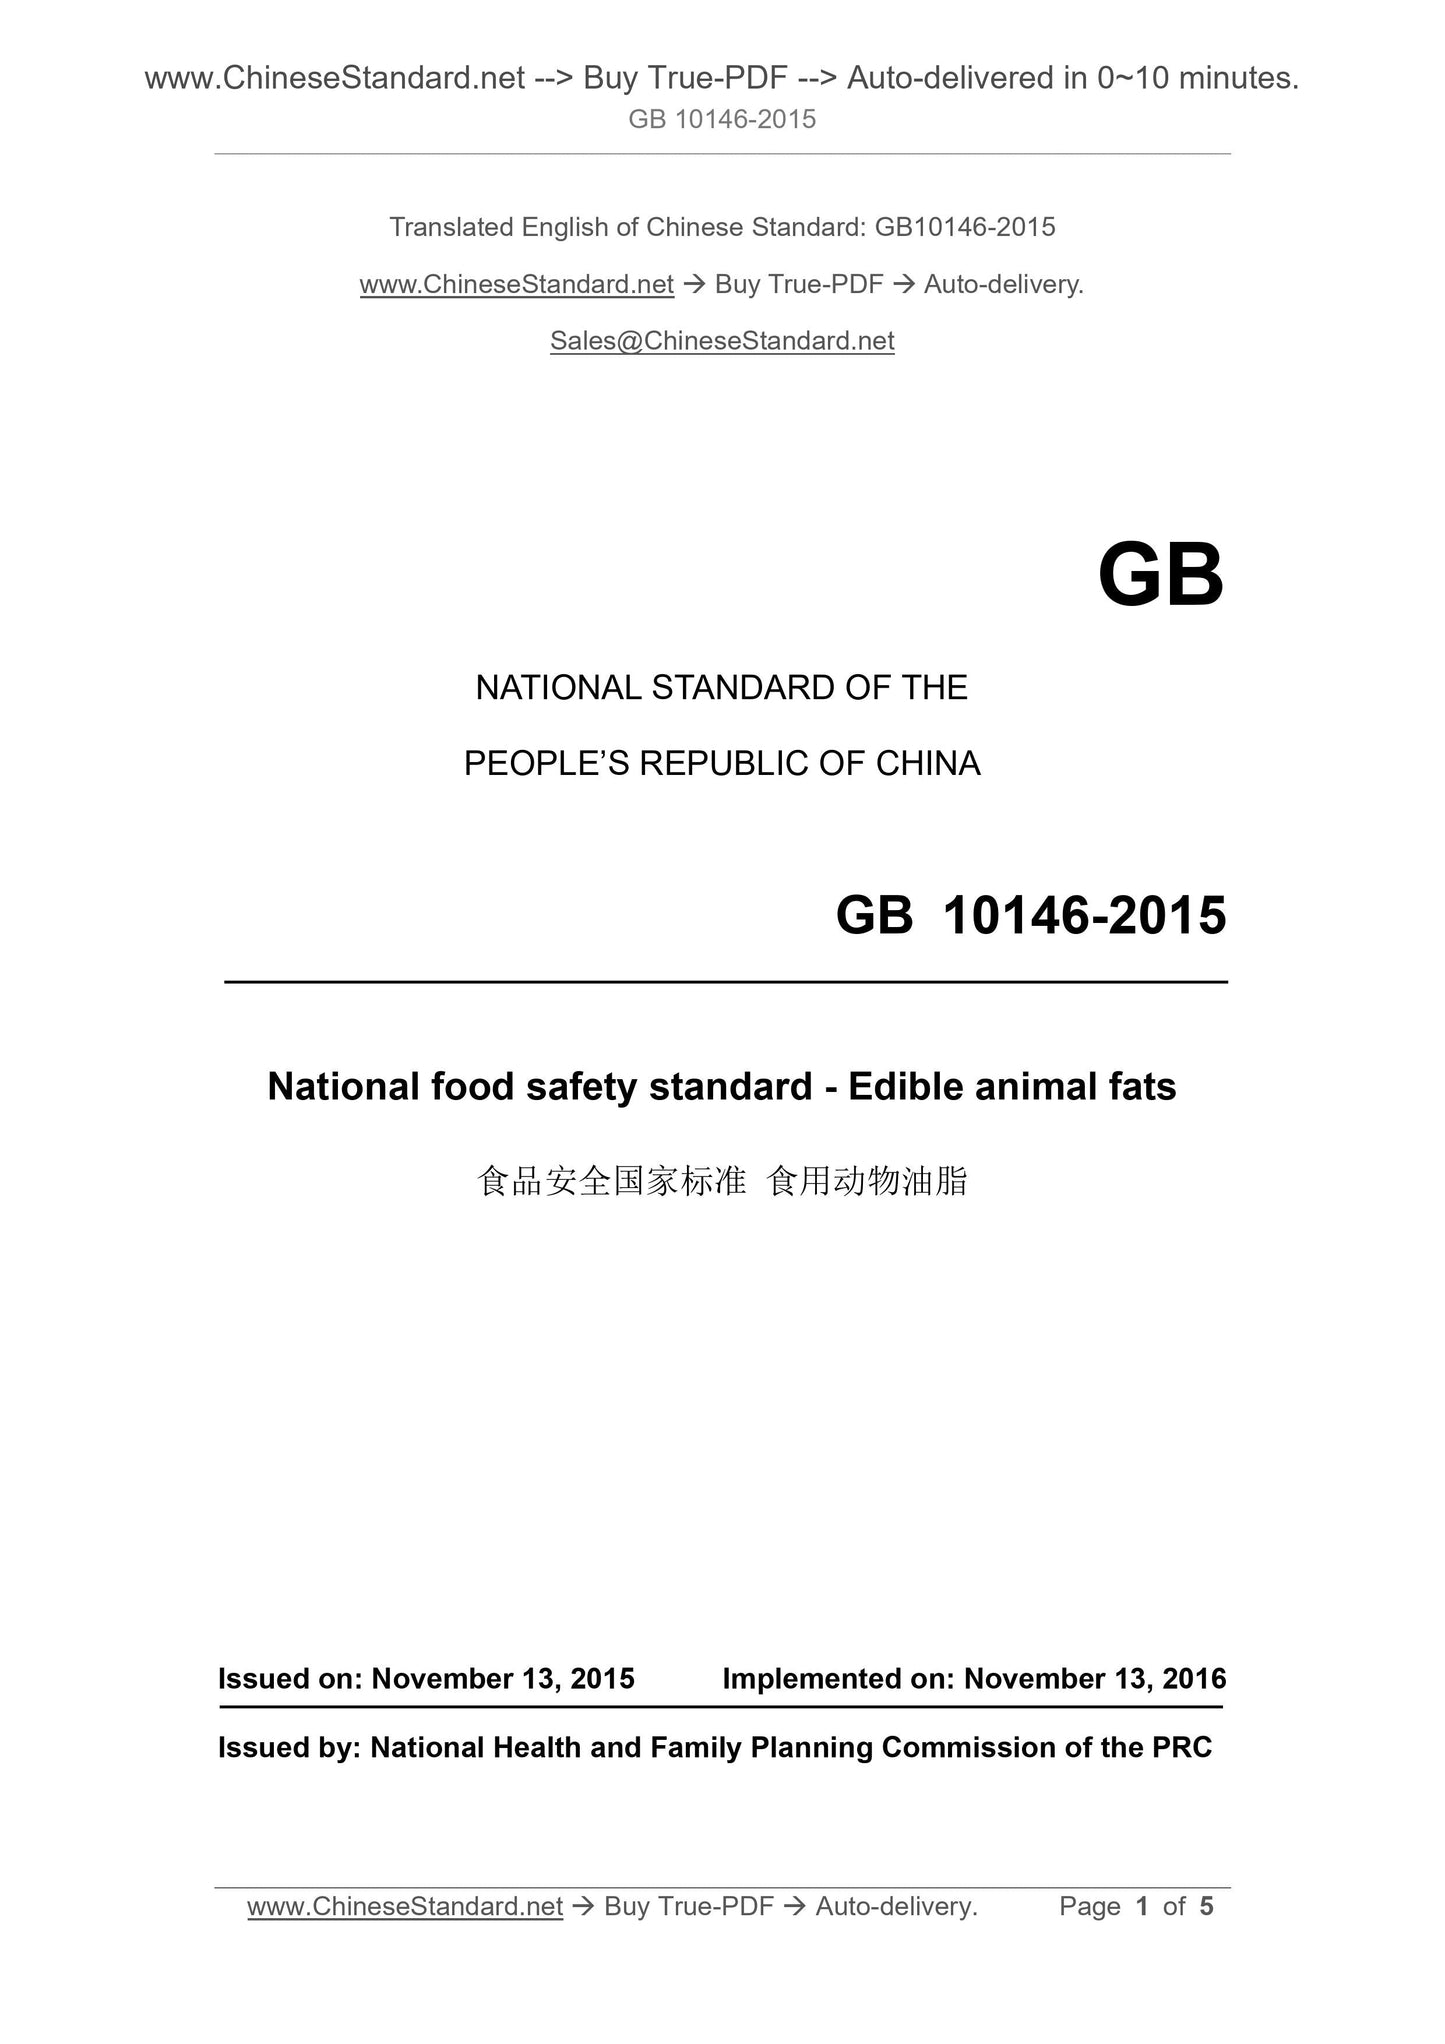 GB 10146-2015 Page 1